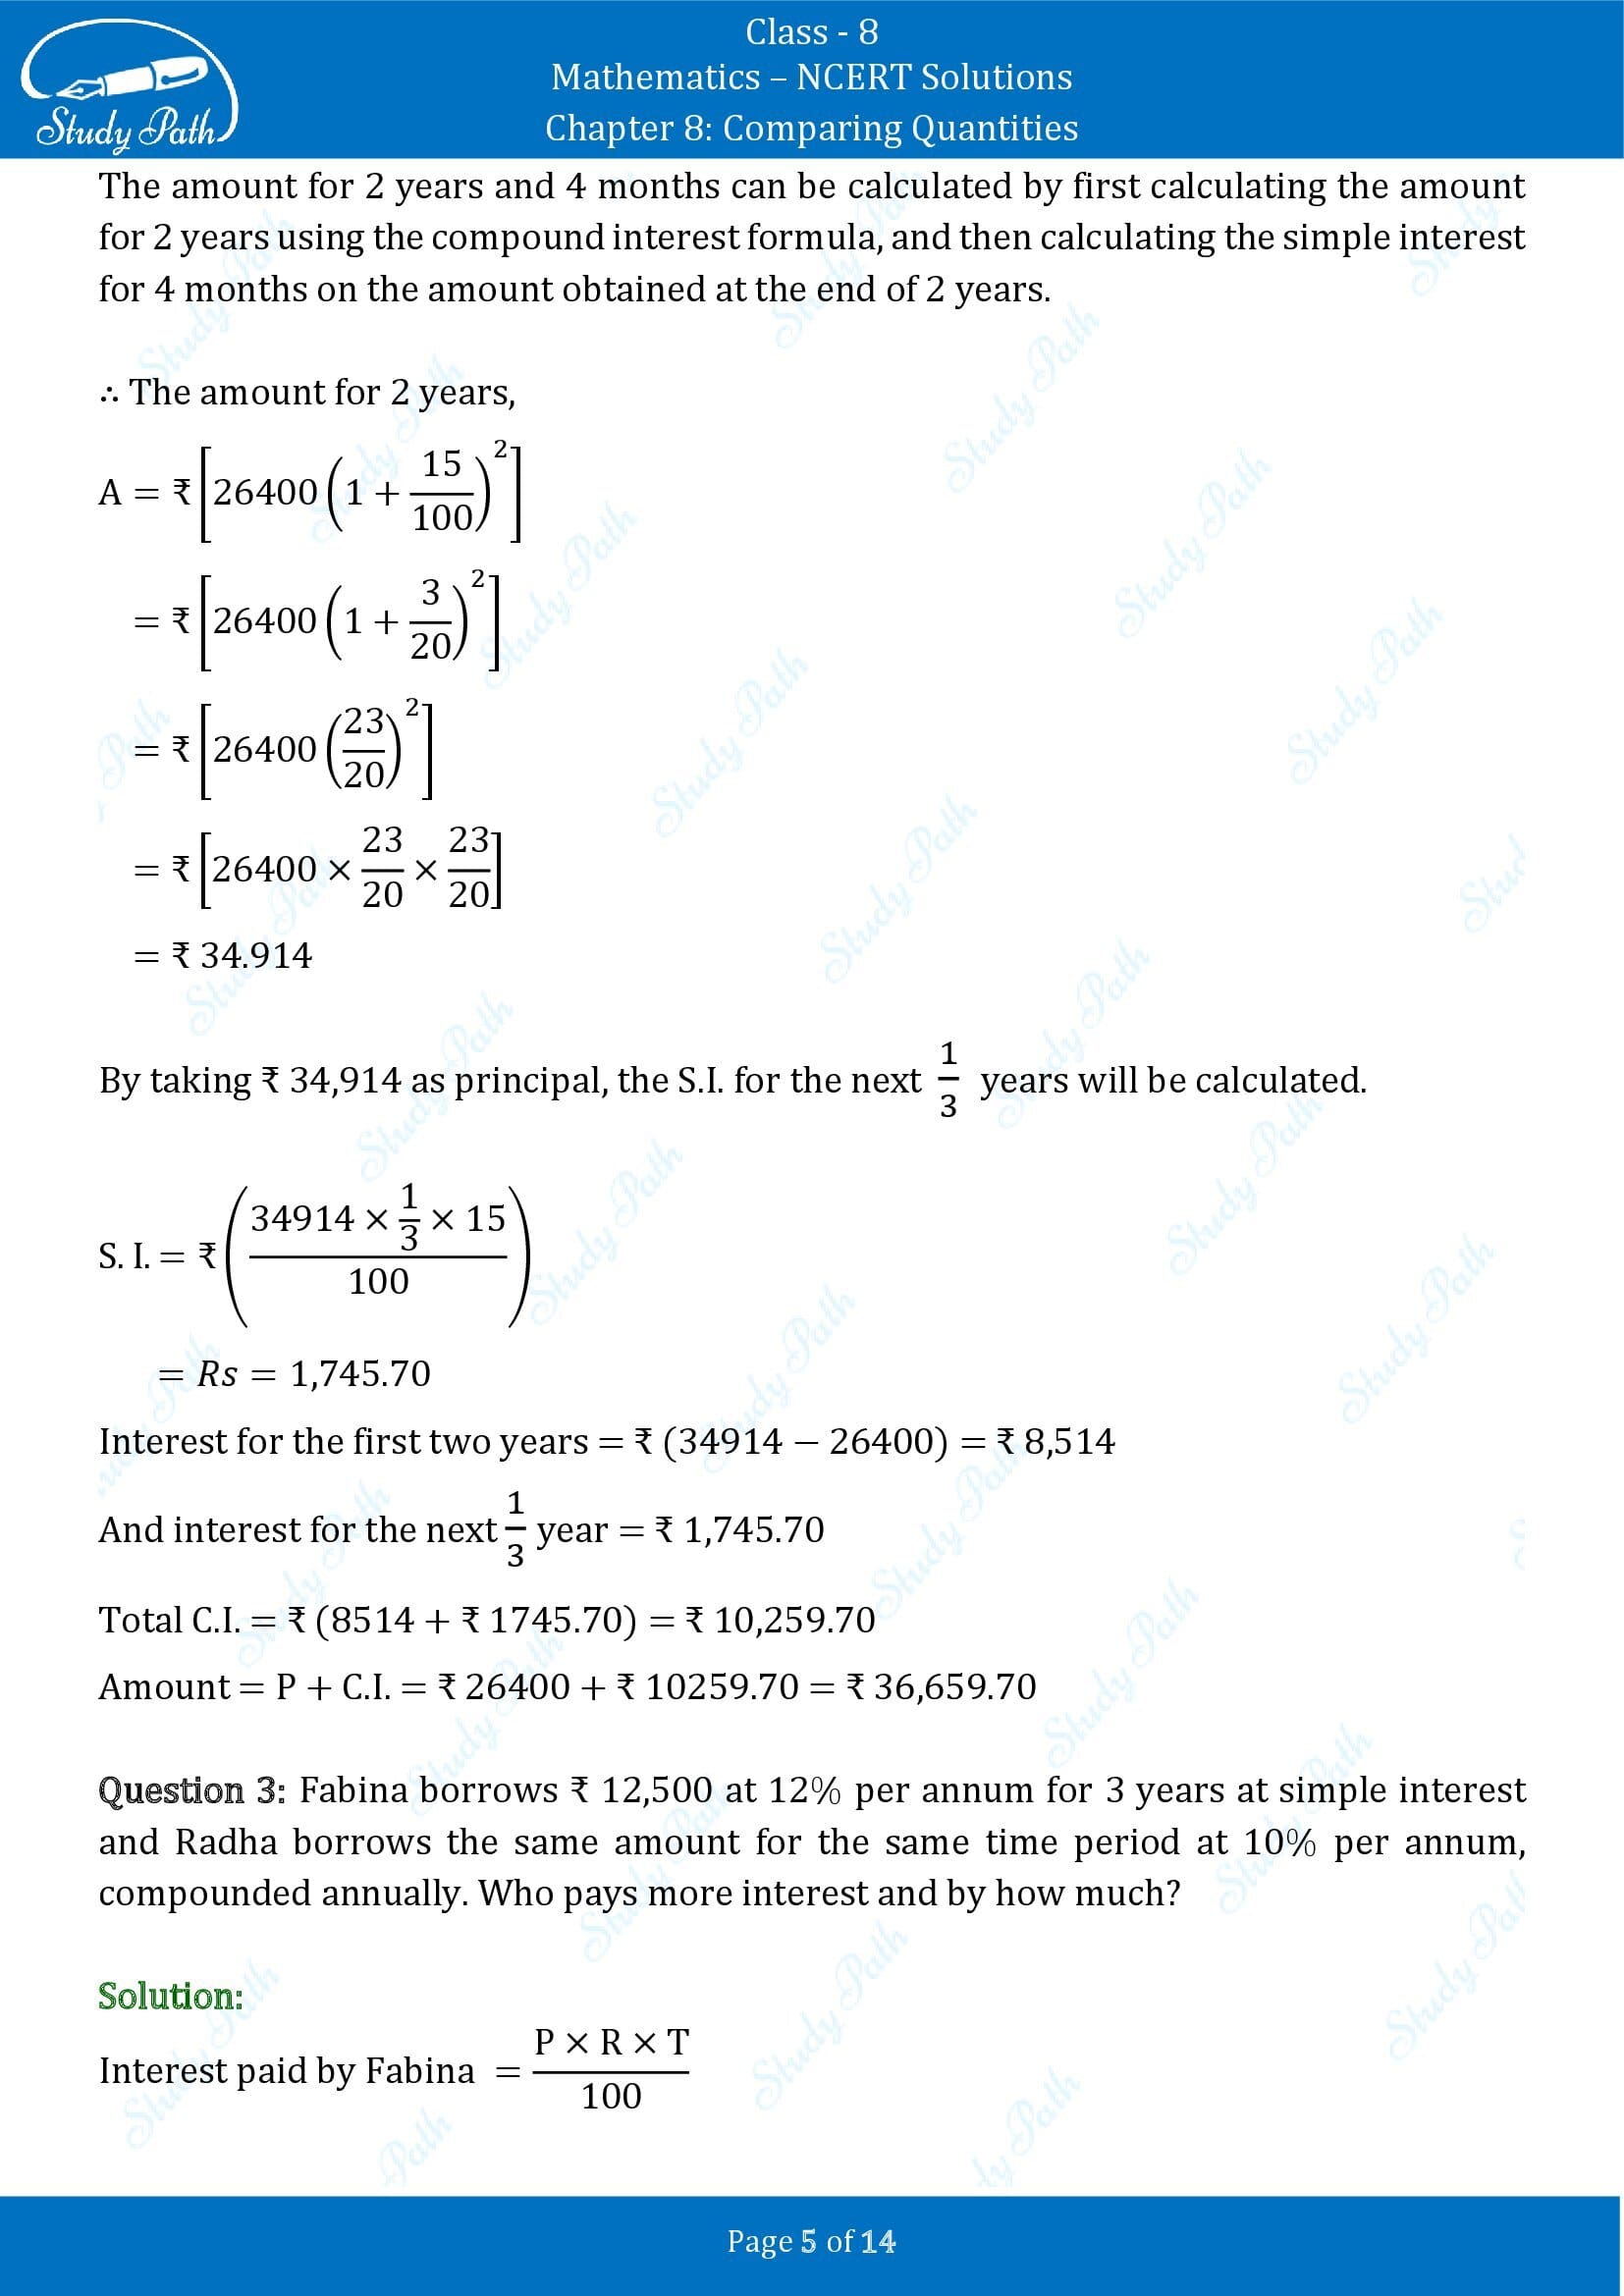 NCERT Solutions for Class 8 Maths Chapter 8 Comparing Quantities Exercise 8.3 00005